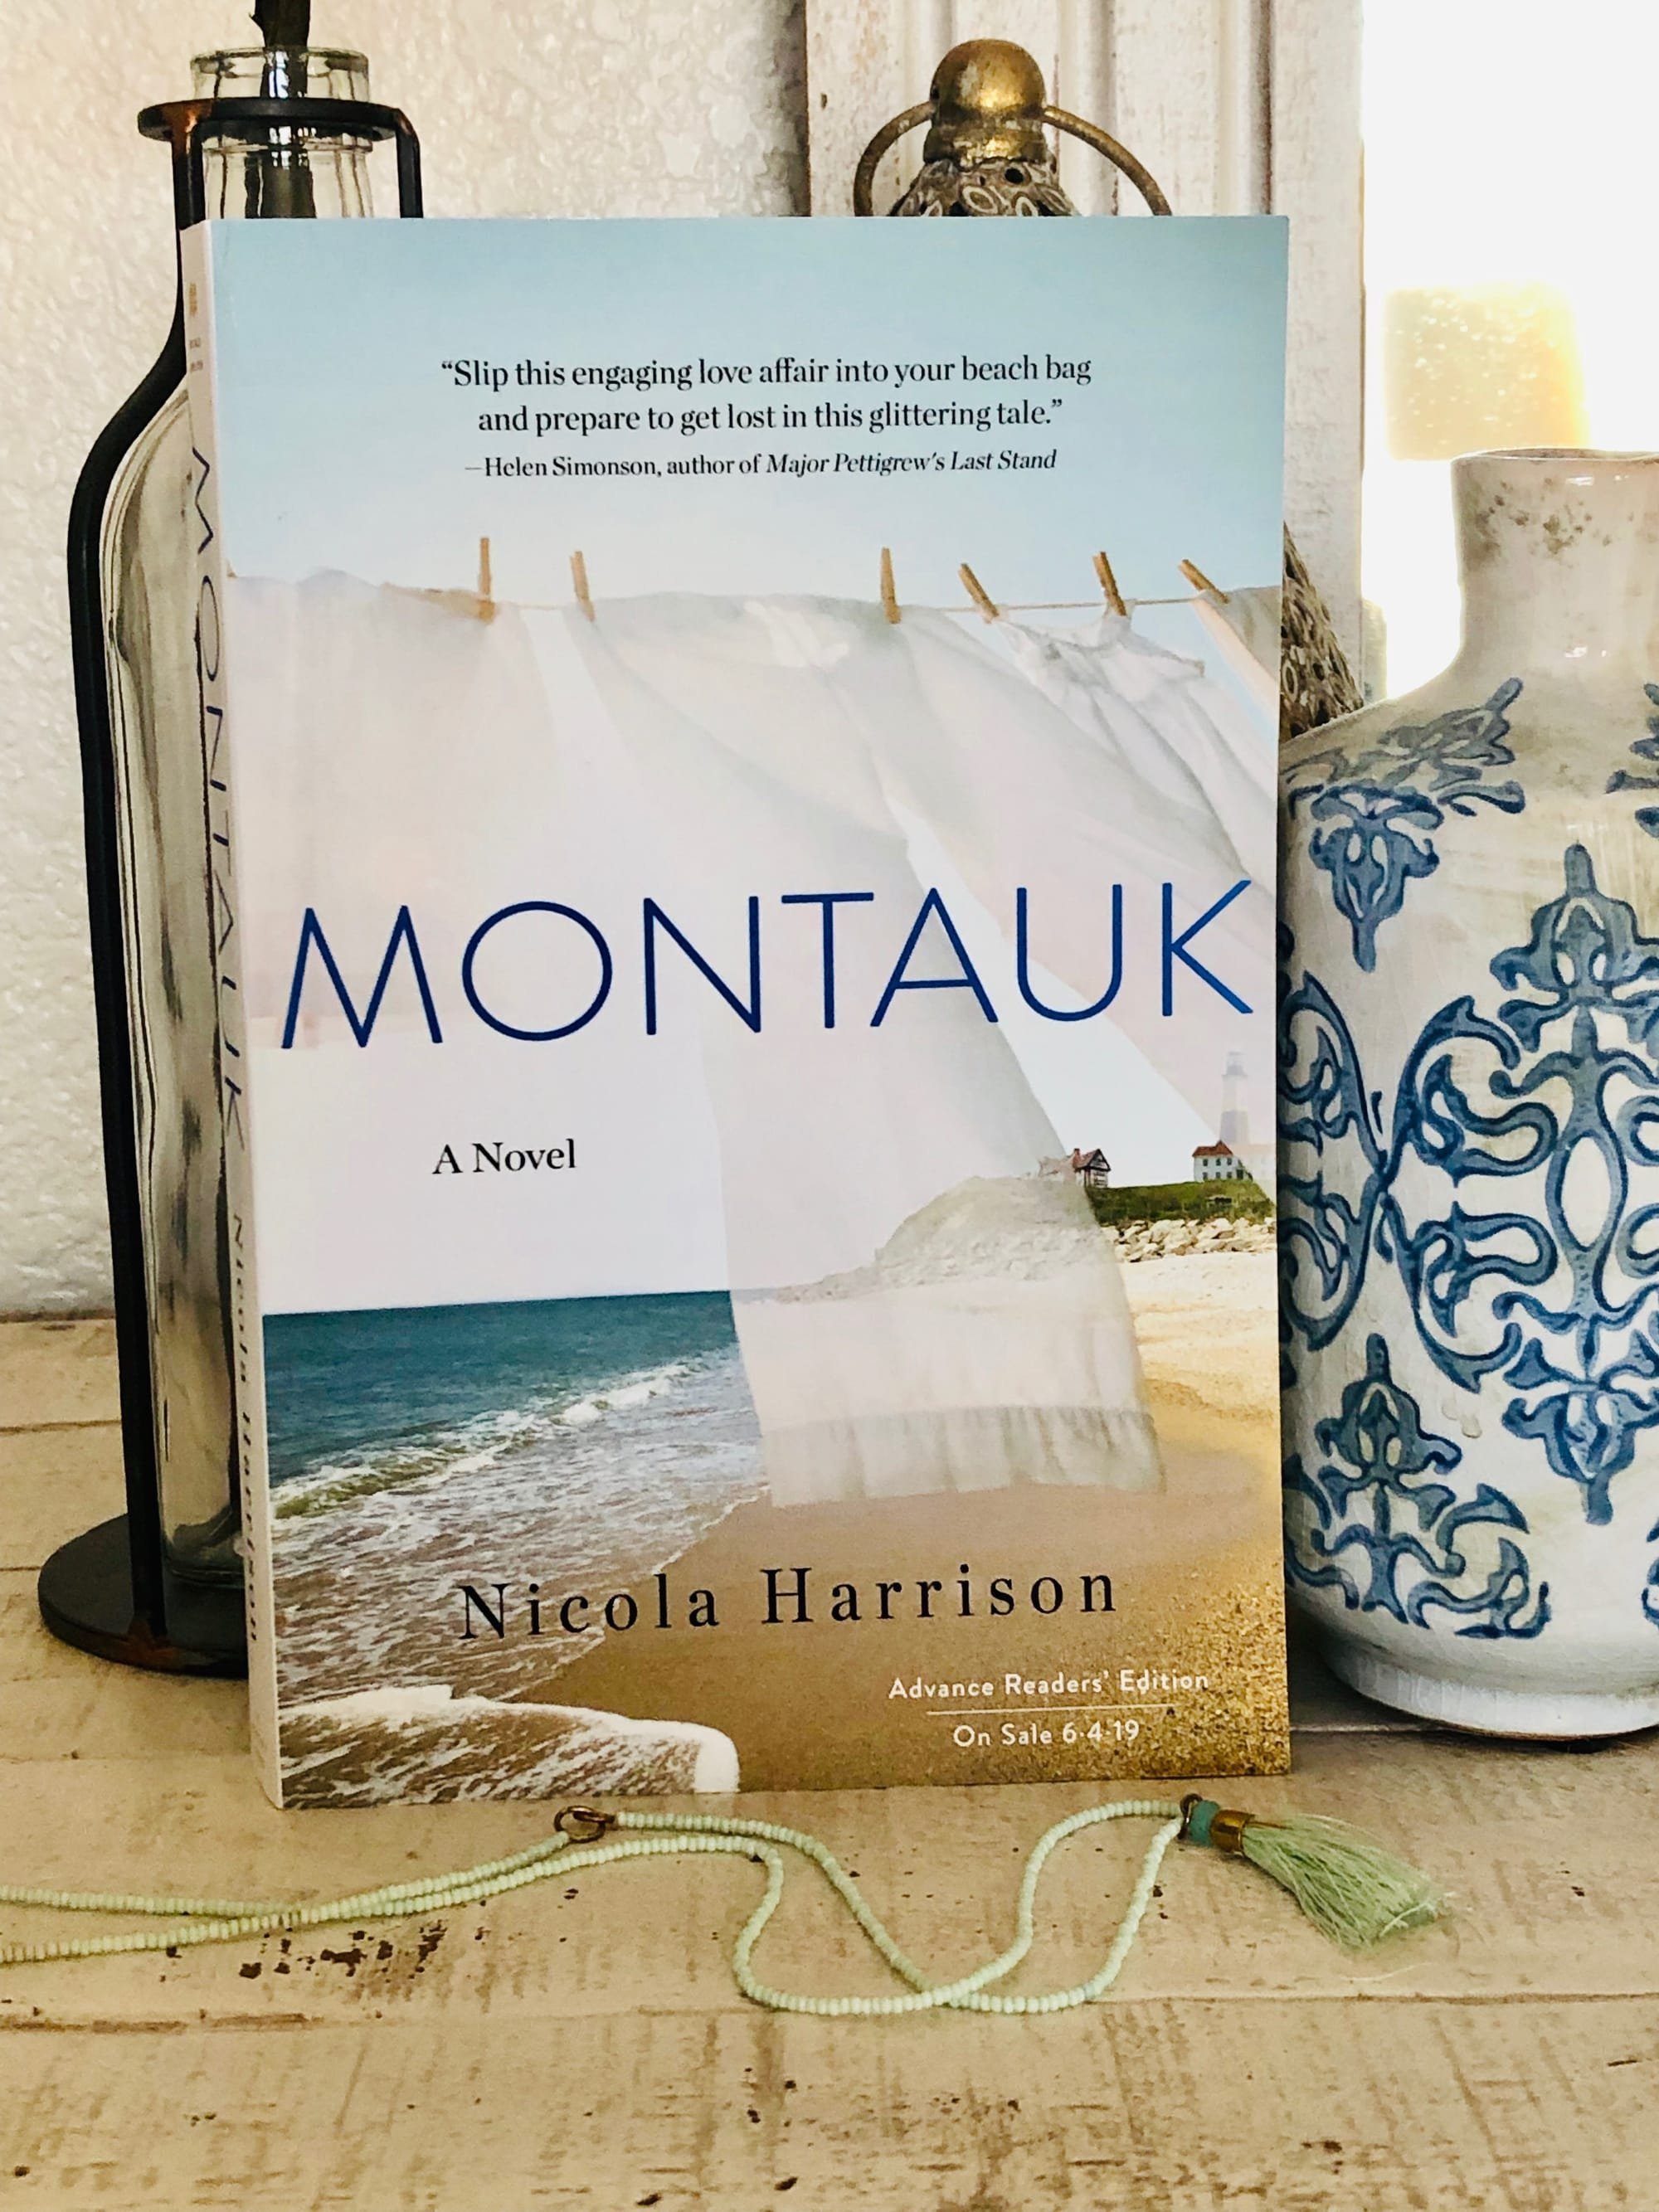 Montauk in the mail today!